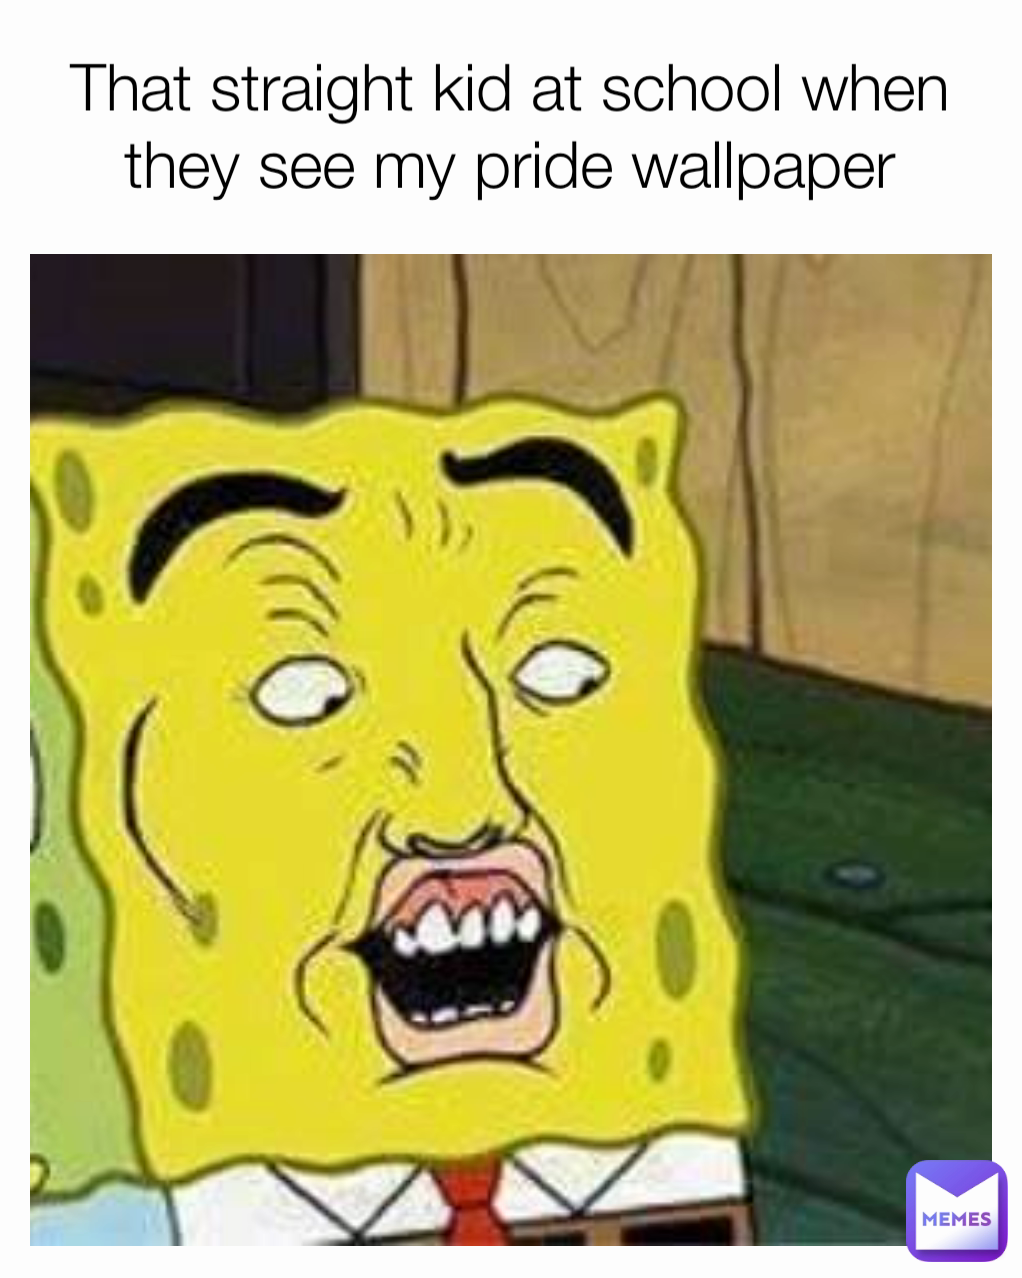 That straight kid at school when they see my pride wallpaper